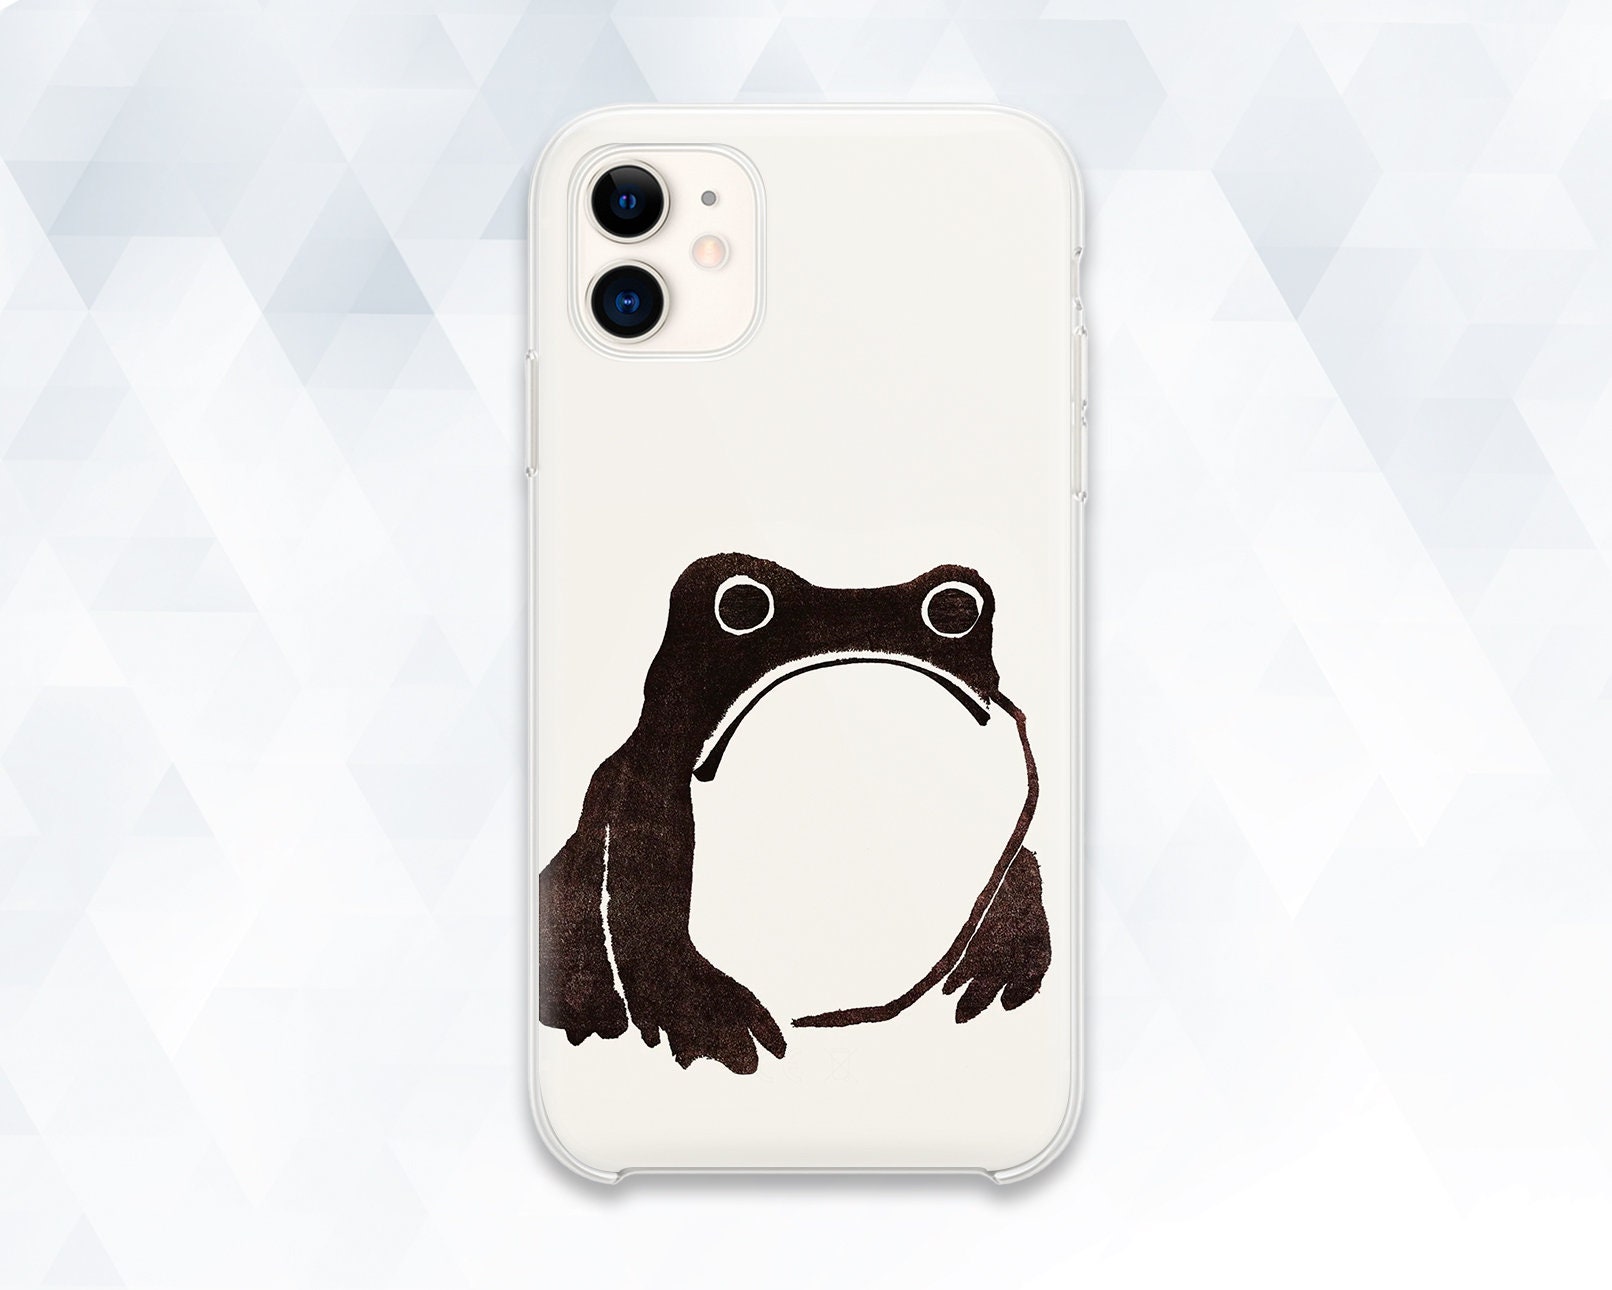 Frog iPhone Case 